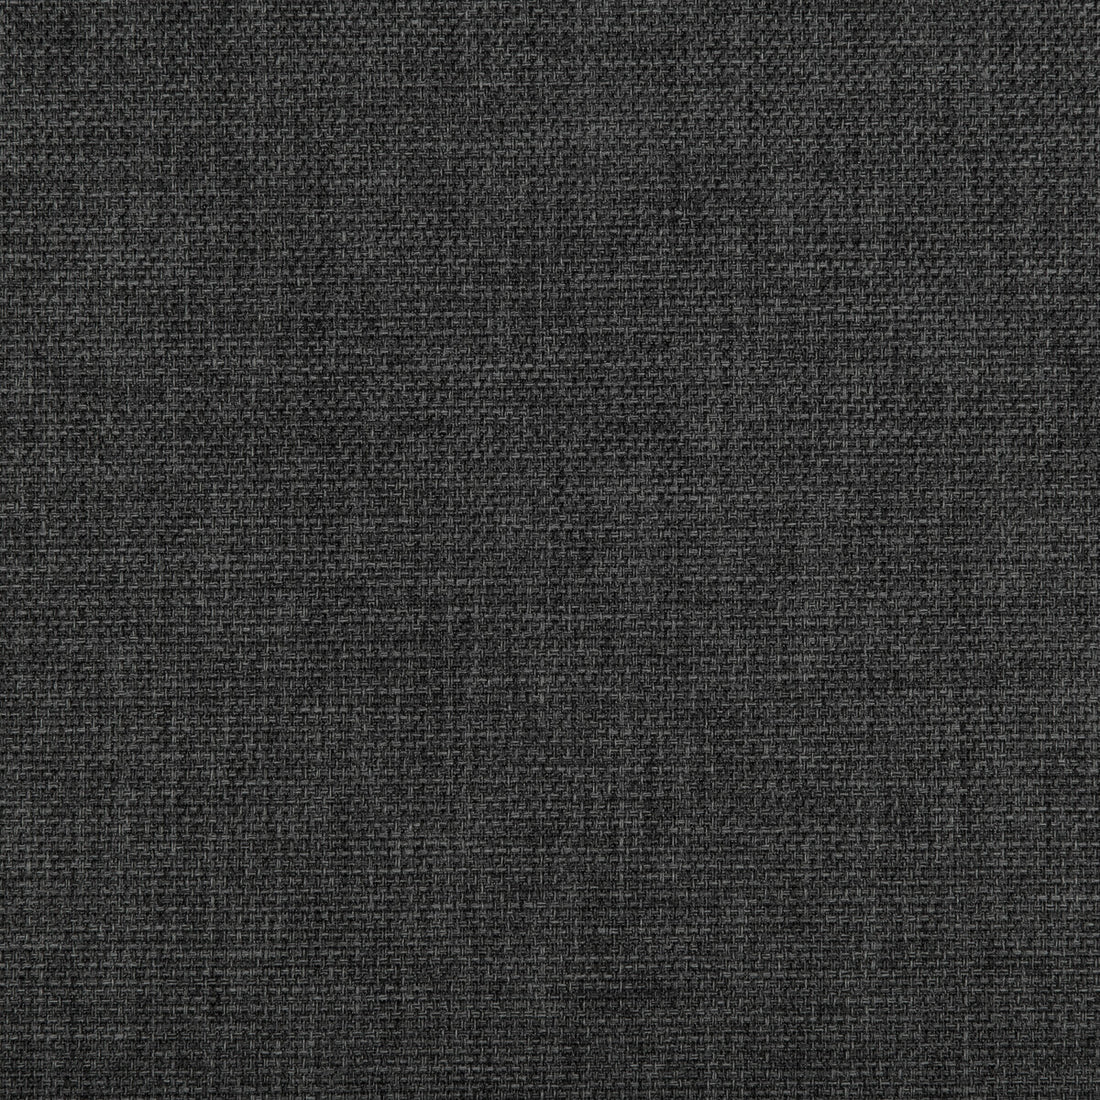 Kravet Contract fabric in 4645-21 color - pattern 4645.21.0 - by Kravet Contract